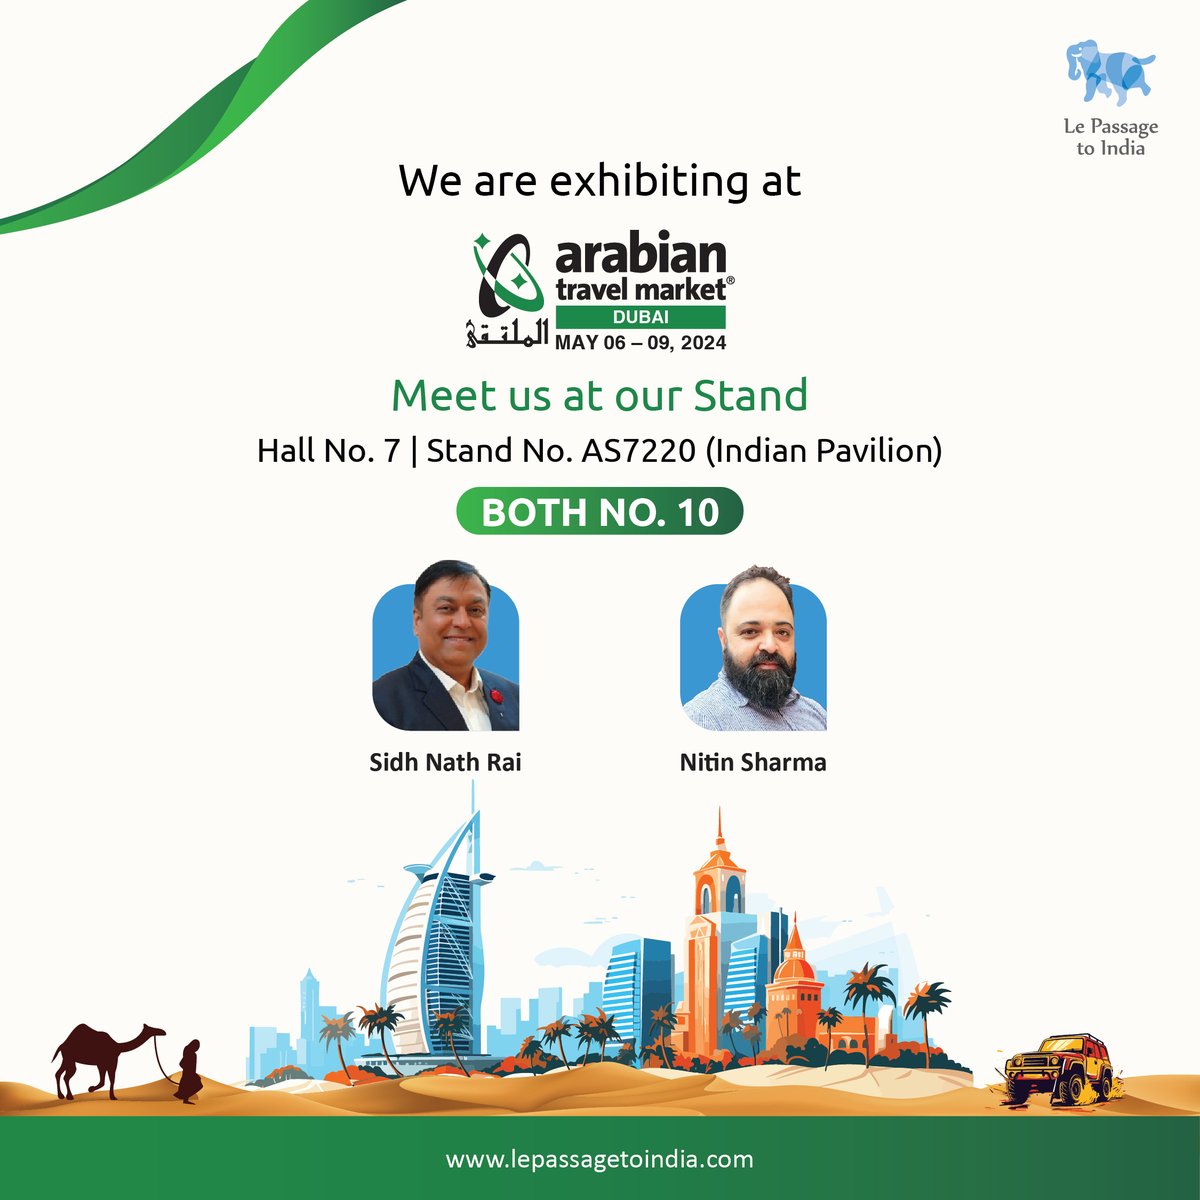 𝐖𝐞 𝐰𝐢𝐥𝐥 𝐛𝐞 𝐚𝐭 𝐀𝐓𝐌 𝐃𝐮𝐛𝐚𝐢. If you're attending, we look forward to connecting with you at the event. Feel free to reach out to schedule a meeting. See you in Dubai!
#ATMDubai #ATM2024 #ATM #Dubai #ArabianTravelMarket #TravelTrade  #LePassageToIndia #LPTI